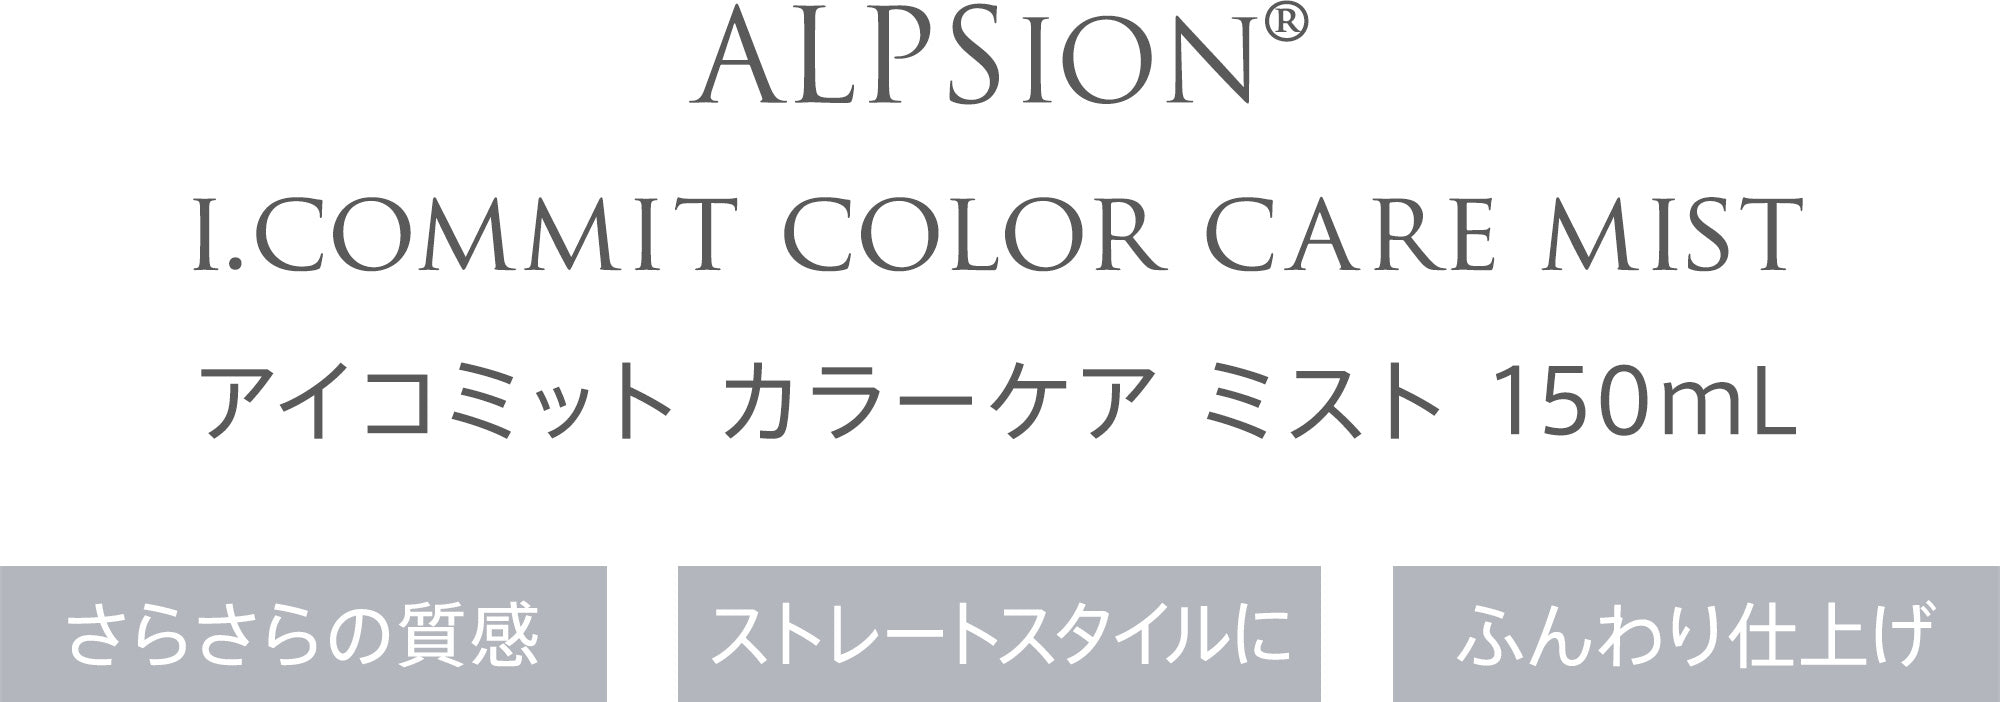 ALPSION® i.commit color care mist アイコミット カラーケア ミスト 150mL